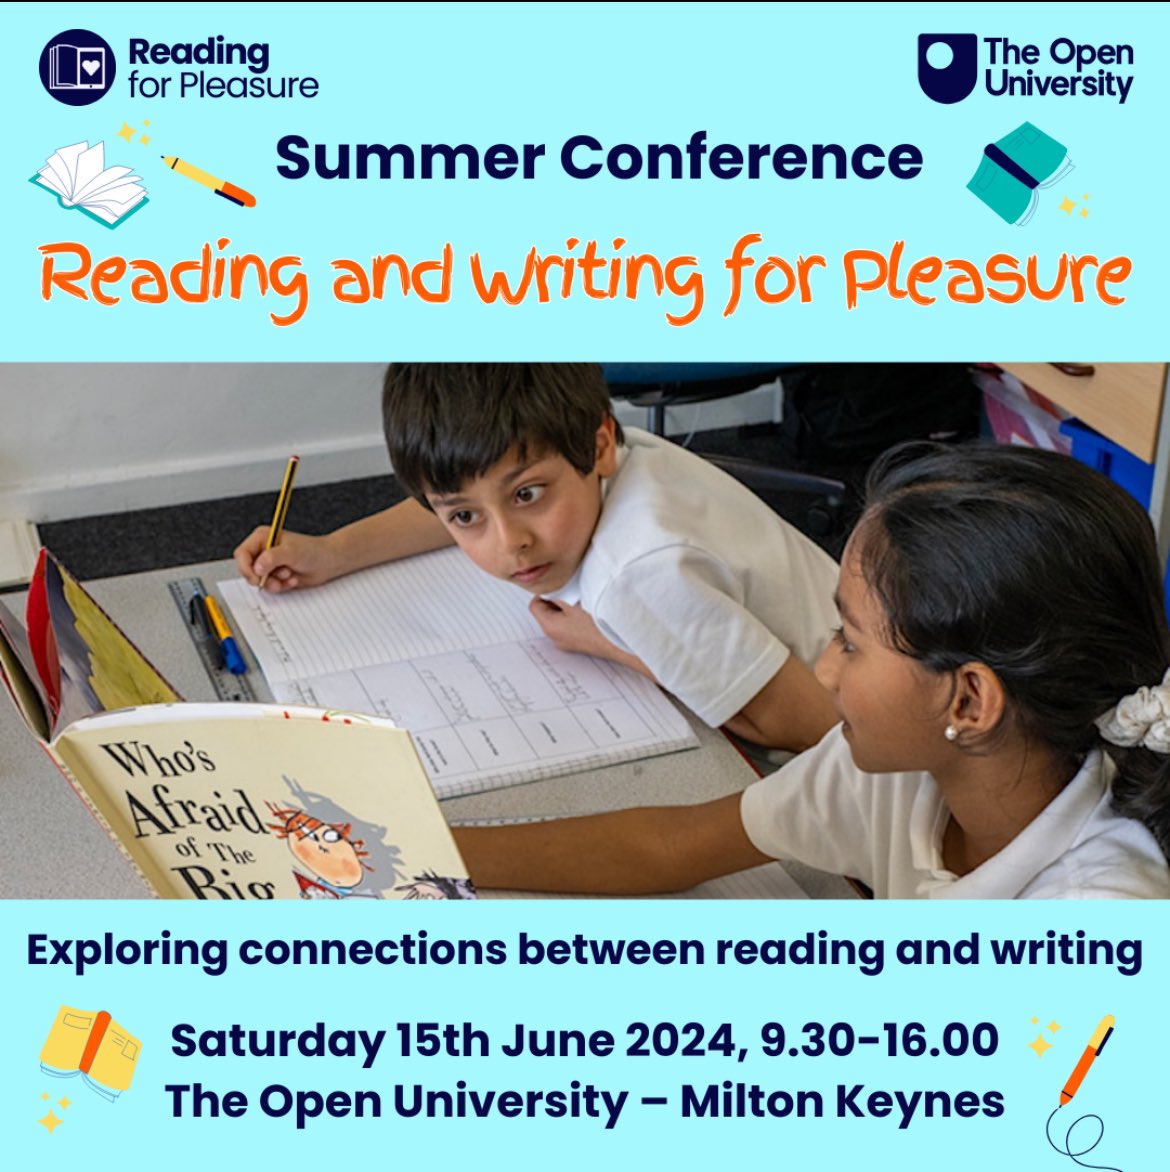 There's only a few weeks until the next @OpenUni_RfP @The_UKLA conference on June 15th. It really is a superb line-up so get your tickets now! Author keynotes from @HGold_author and @EarlyTrain, plus a wide range of exciting workshops. More info here: ourfp.org/2024/04/18/rea…